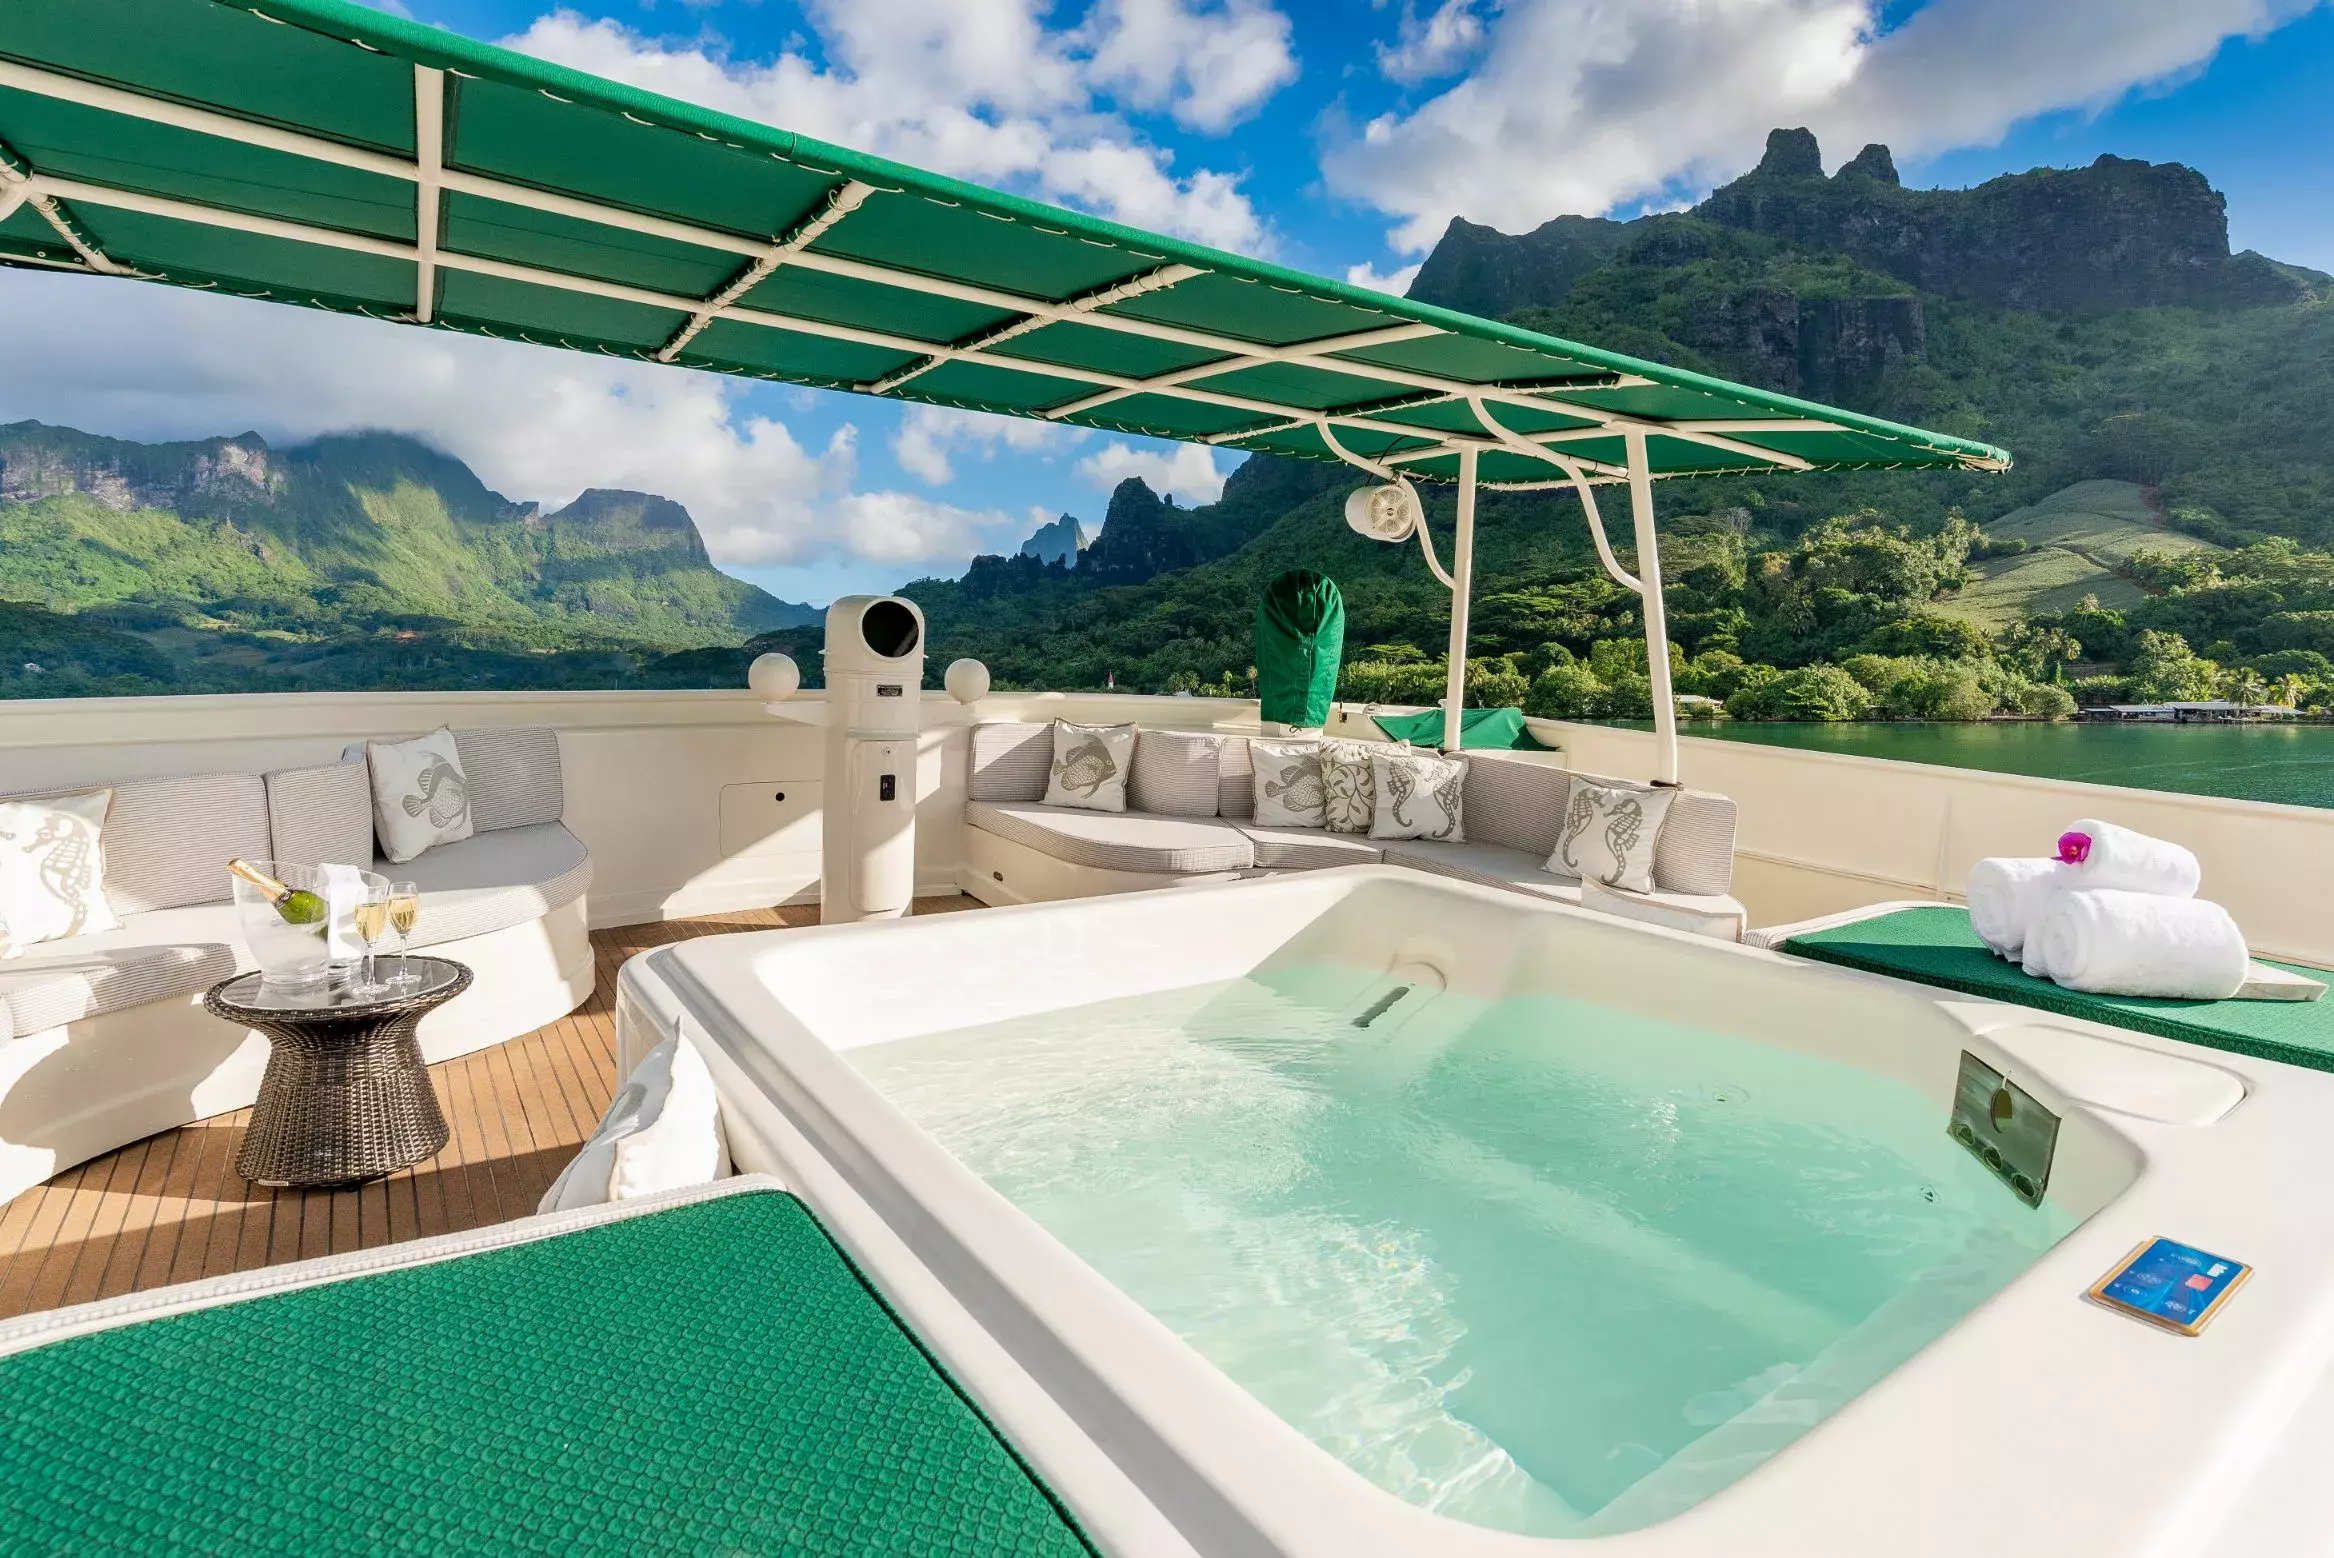 Askari by Sermons - Special Offer for a private Motor Yacht Charter in Tahiti with a crew